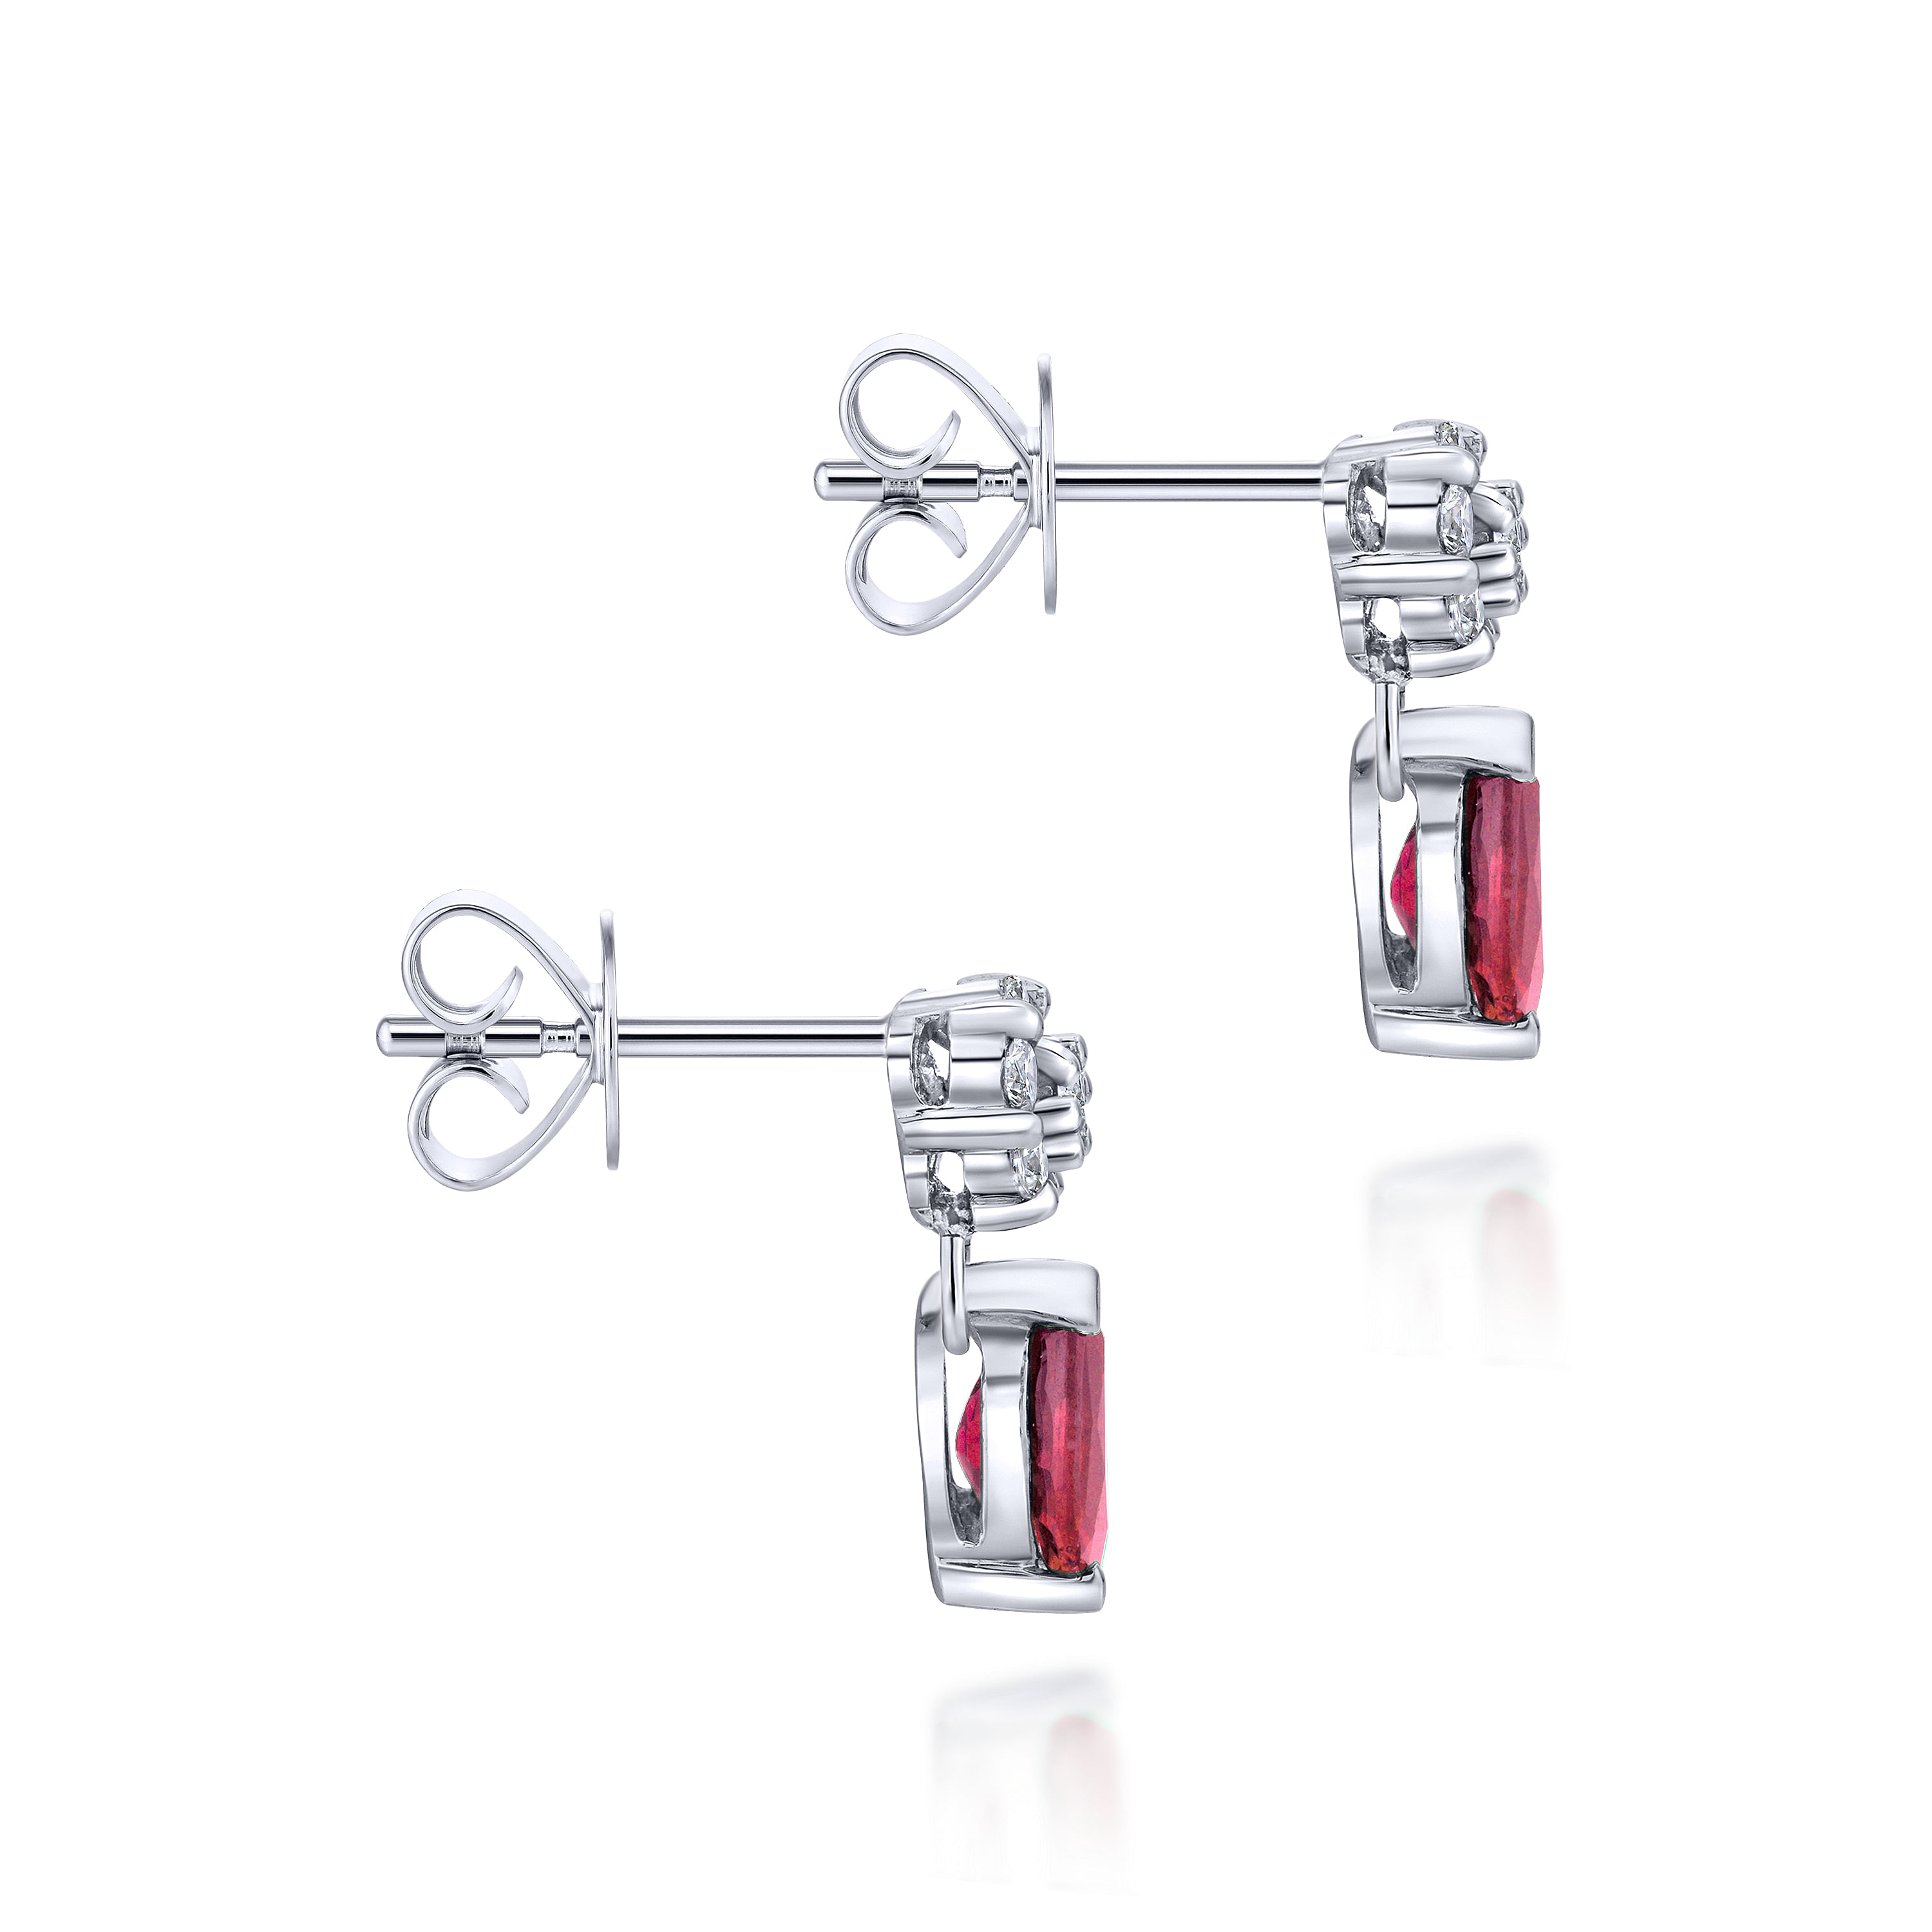 14K White Gold Floral Diamond Stud Earrings with Pear Shaped Ruby Drops